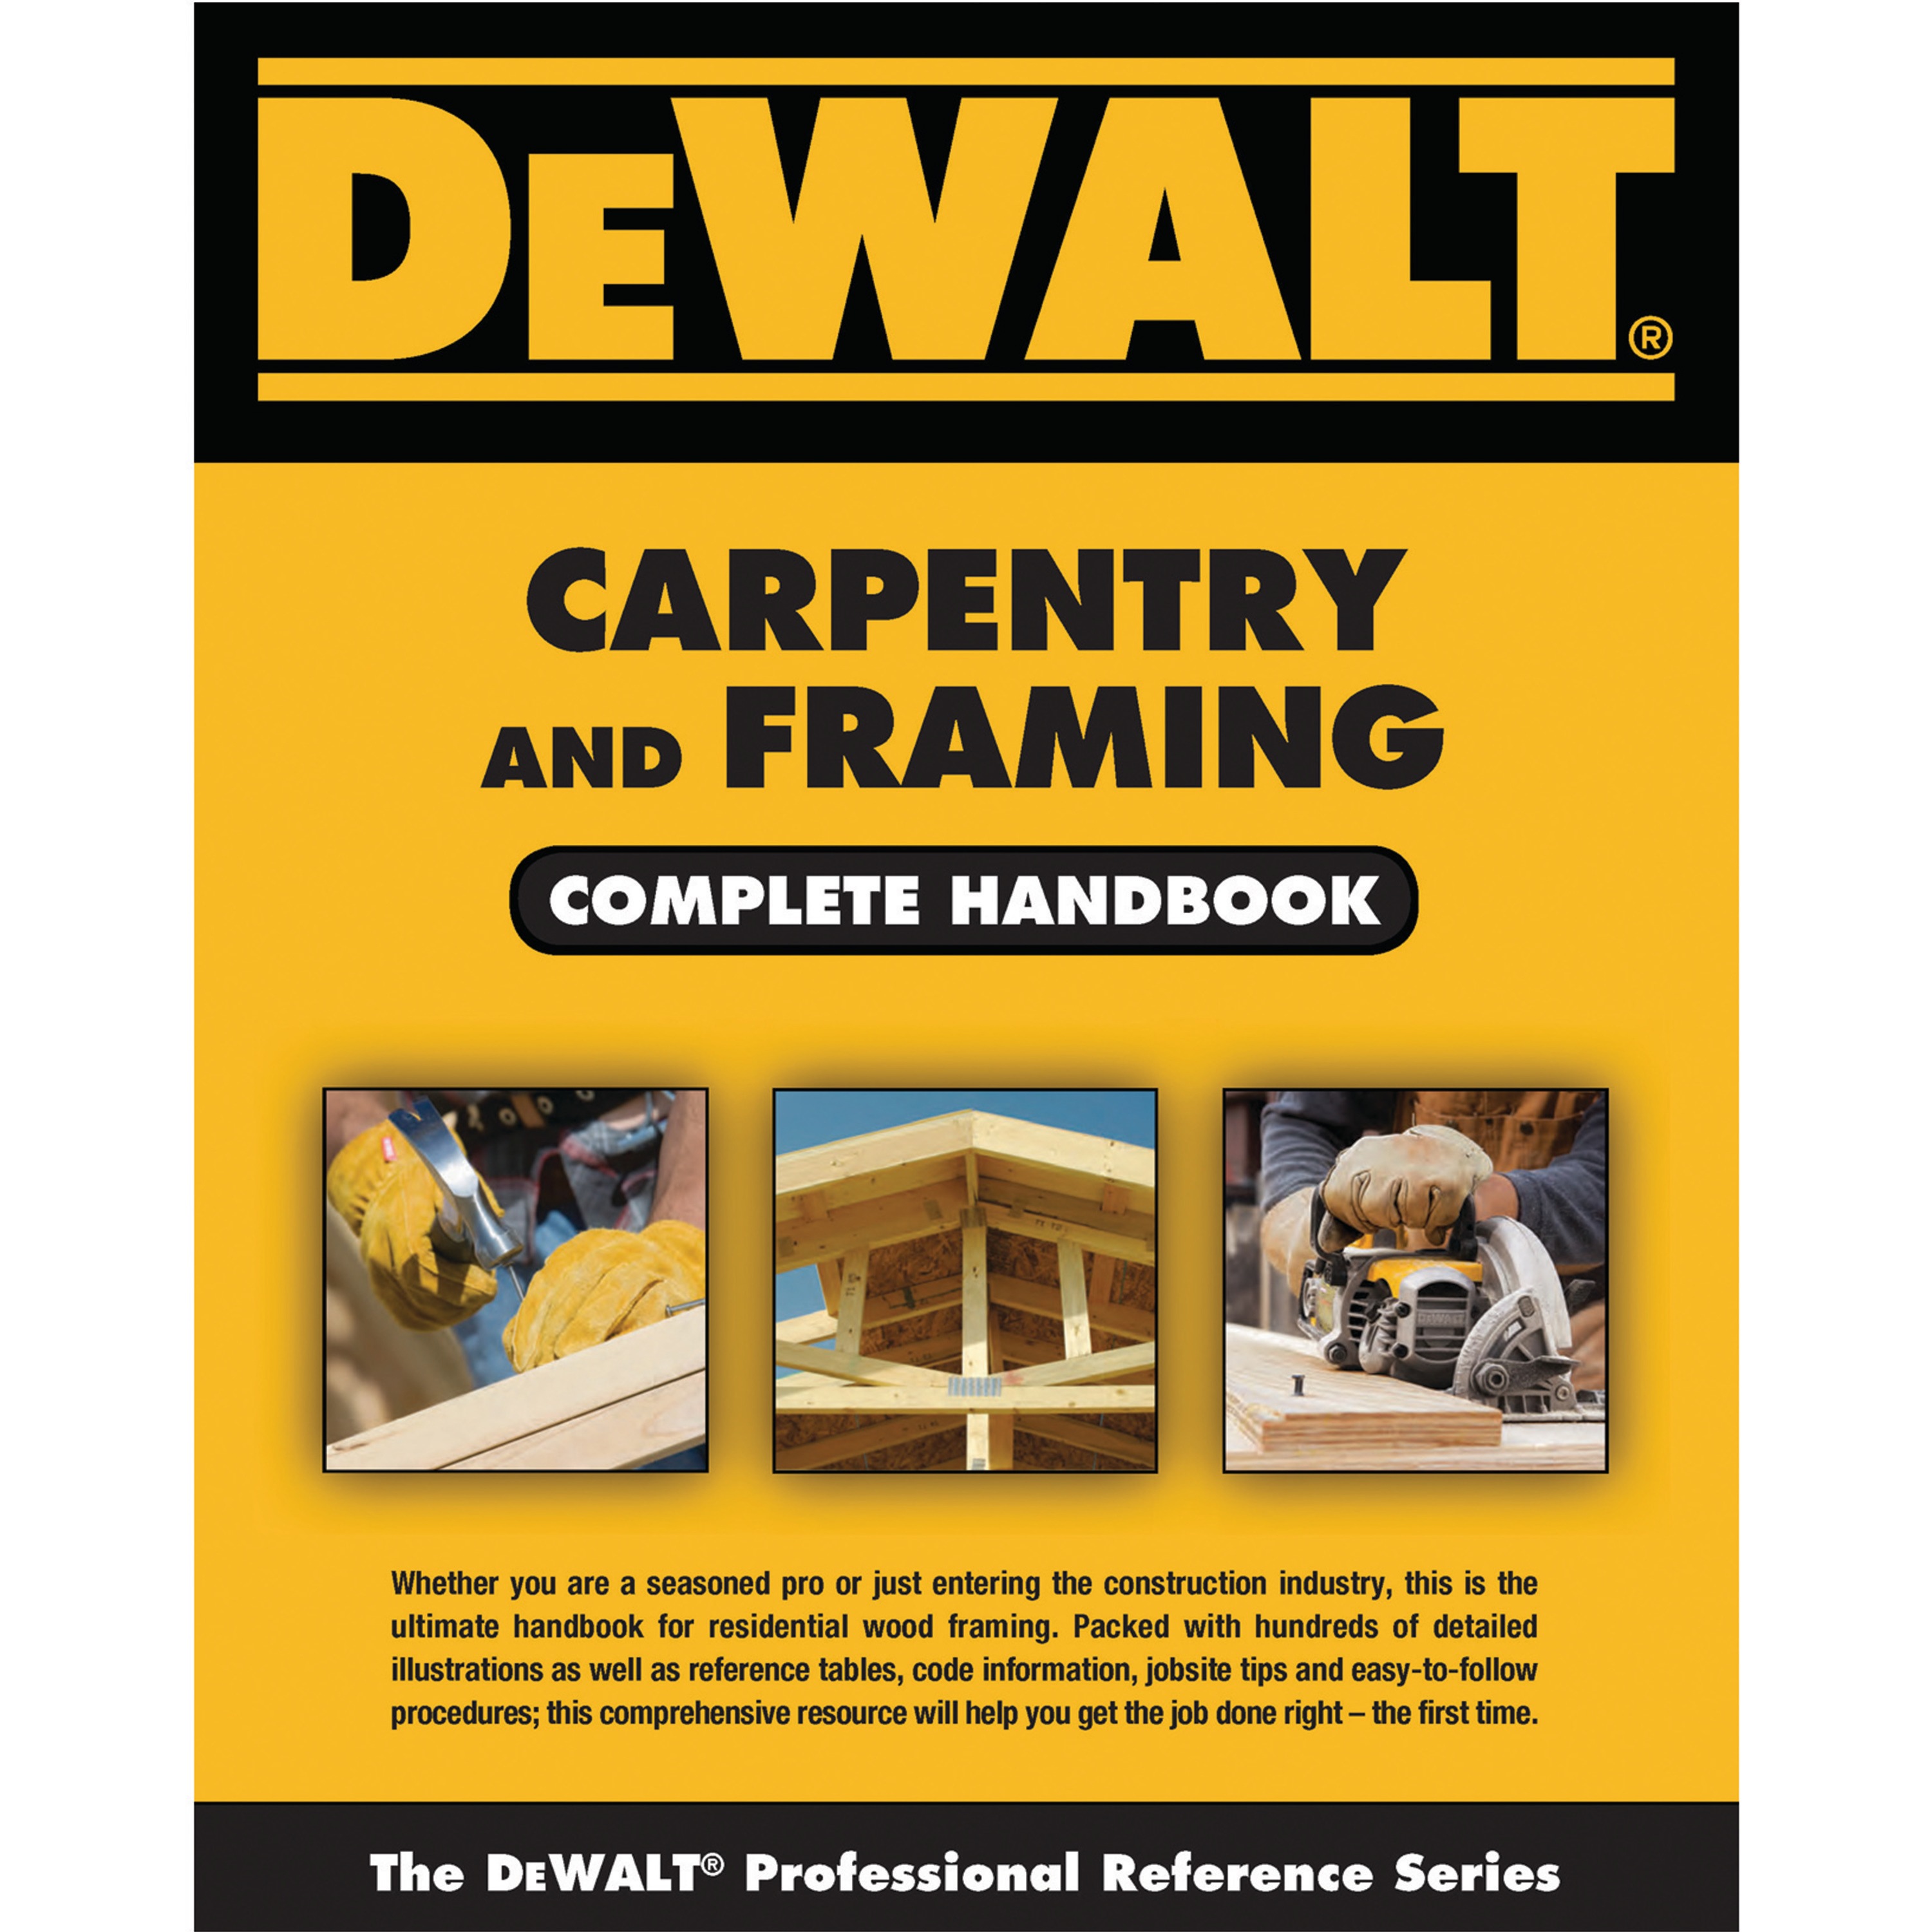 Carpentry and Framing Complete Handbook.